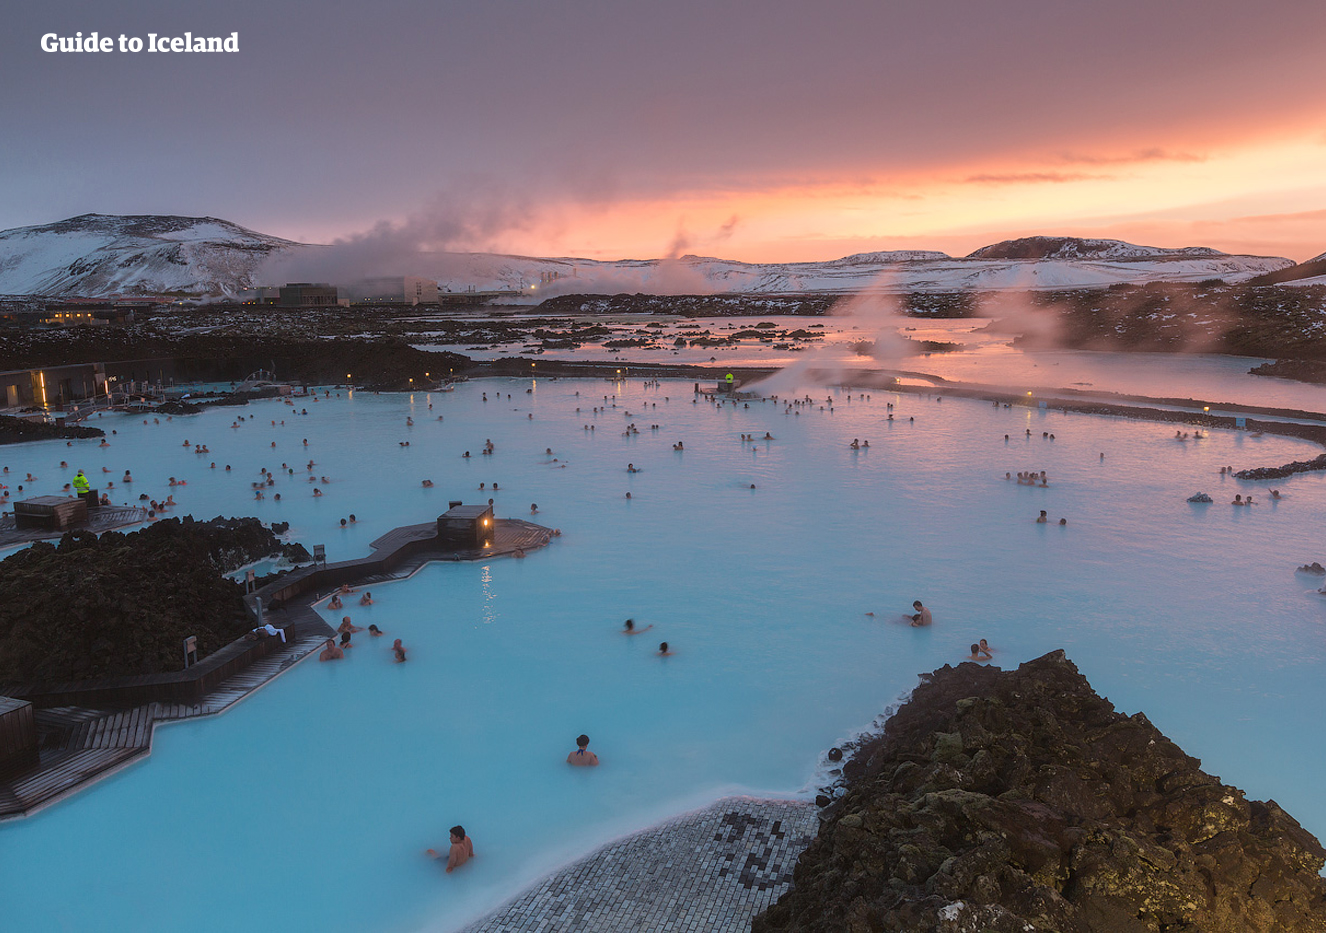 The Blue Lagoon is full of surprises, and the perfect place to relax.